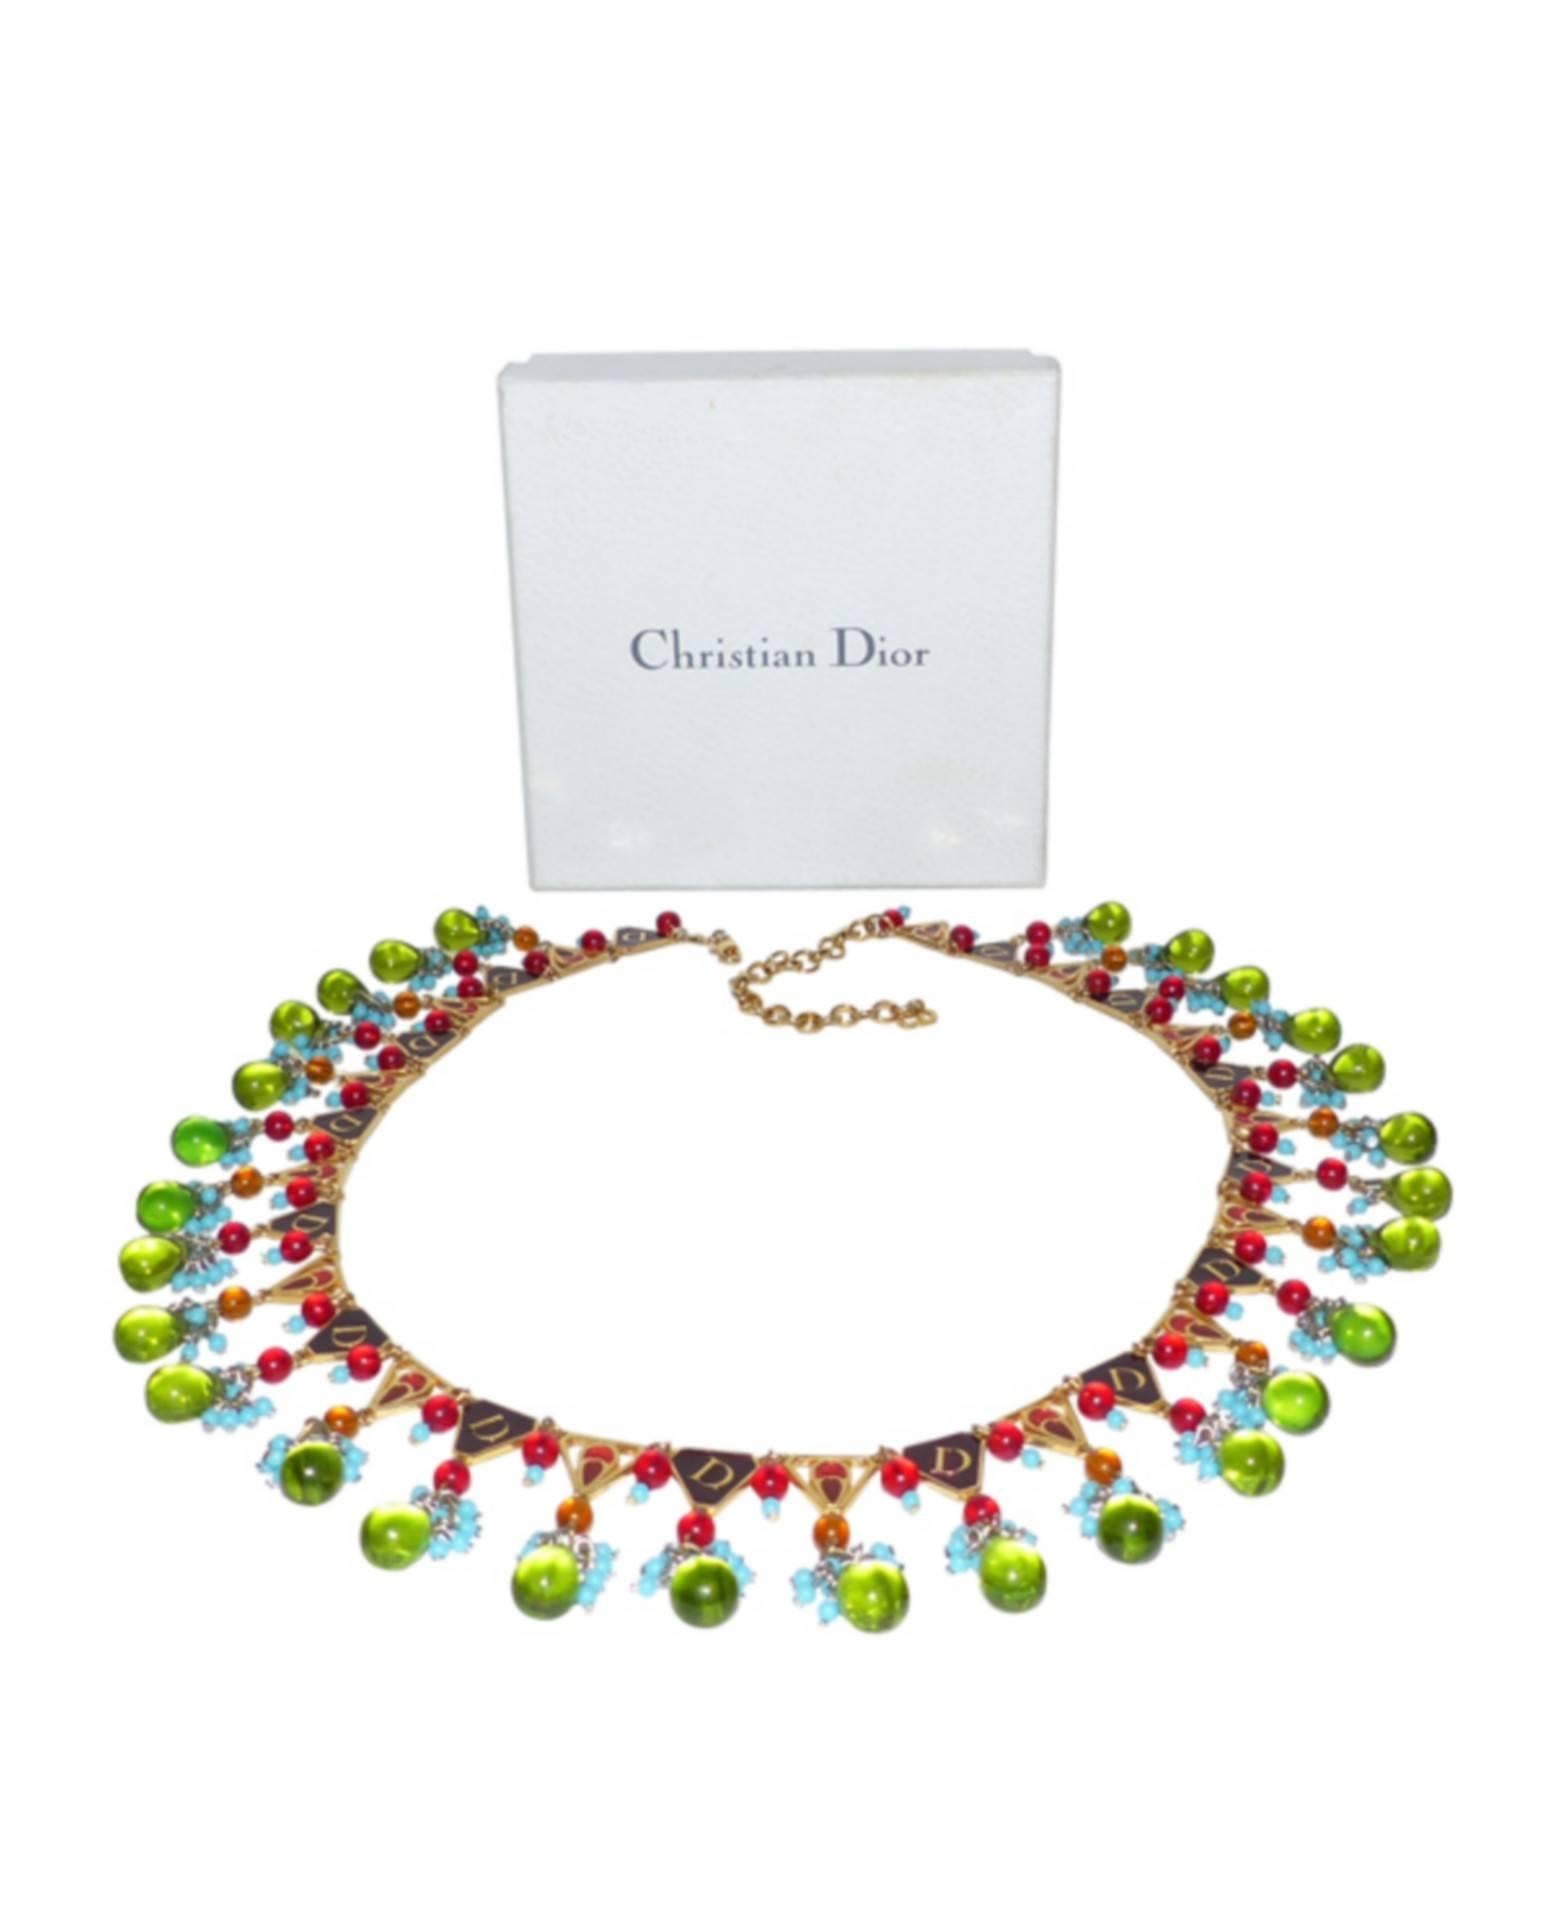 Beautiful Christian Dior necklace in green glass beads, red and turquoise.
Hinged base in gold metal and faceted enamel logo D Dior
Chain link to carry it more or less long and closing carabiner 
Good condition
Comes with its box and dustbag
2